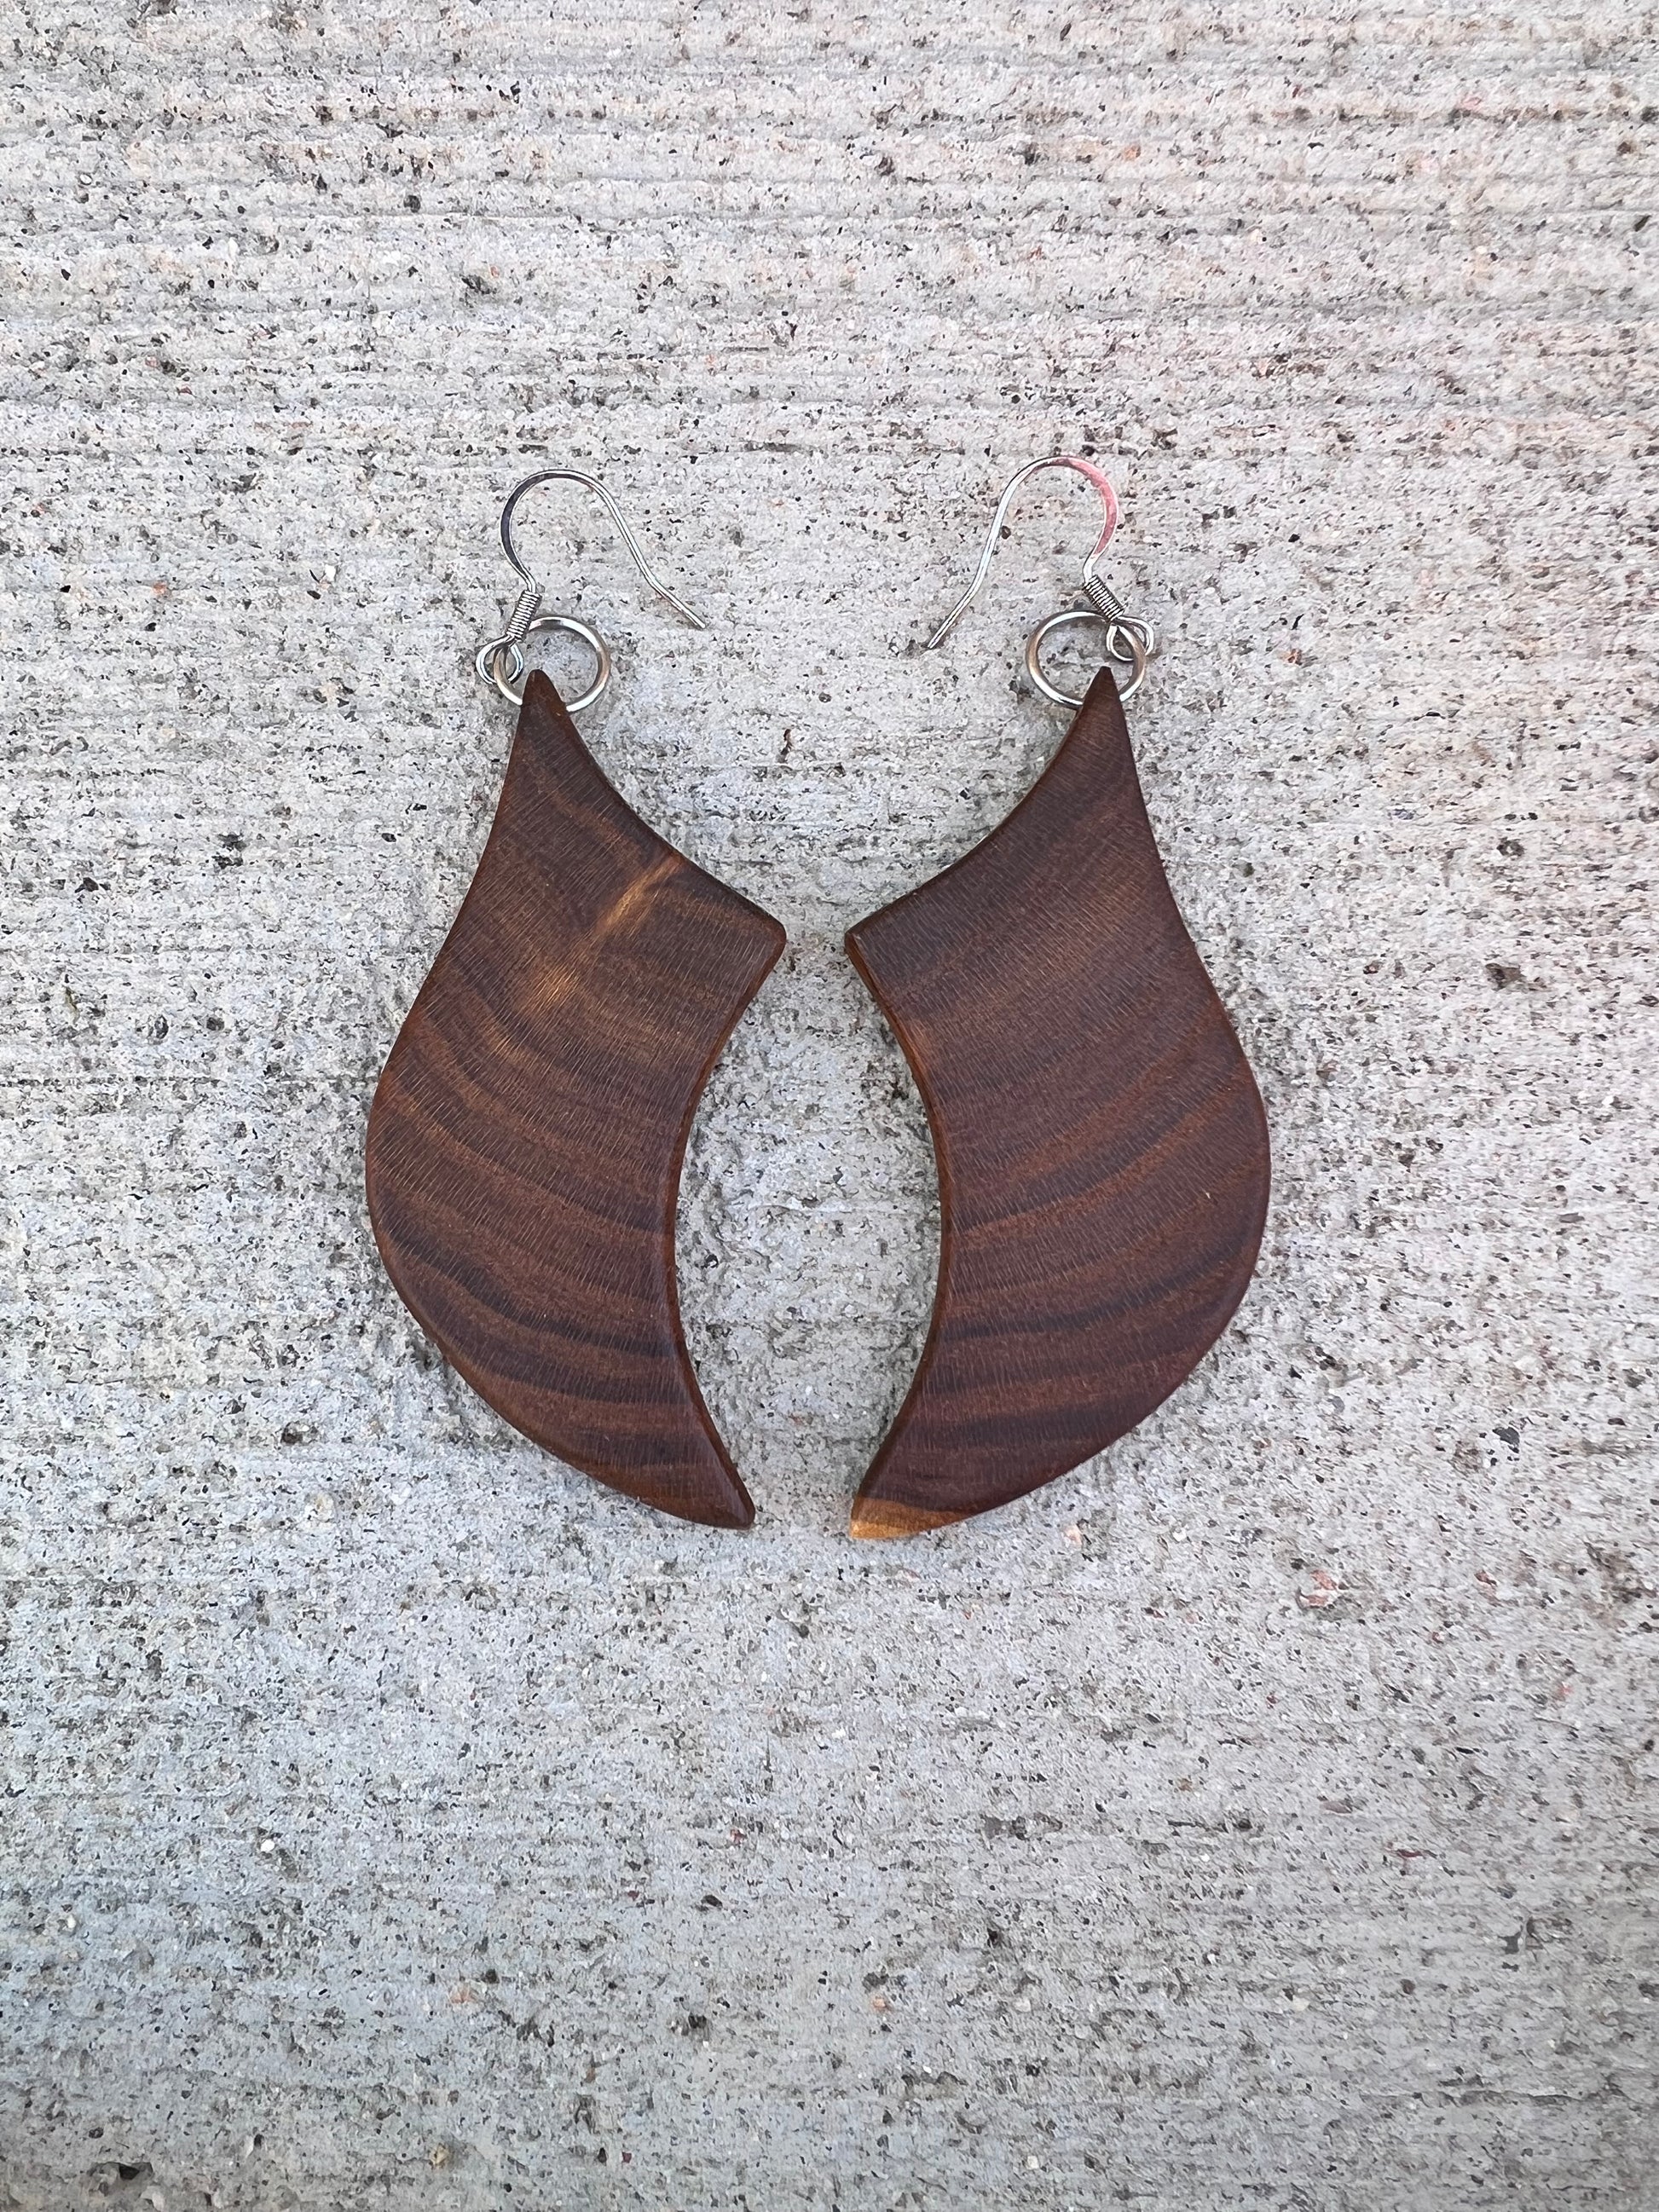 Wooden earrings, Bells, Wild Olive, stainless steal 